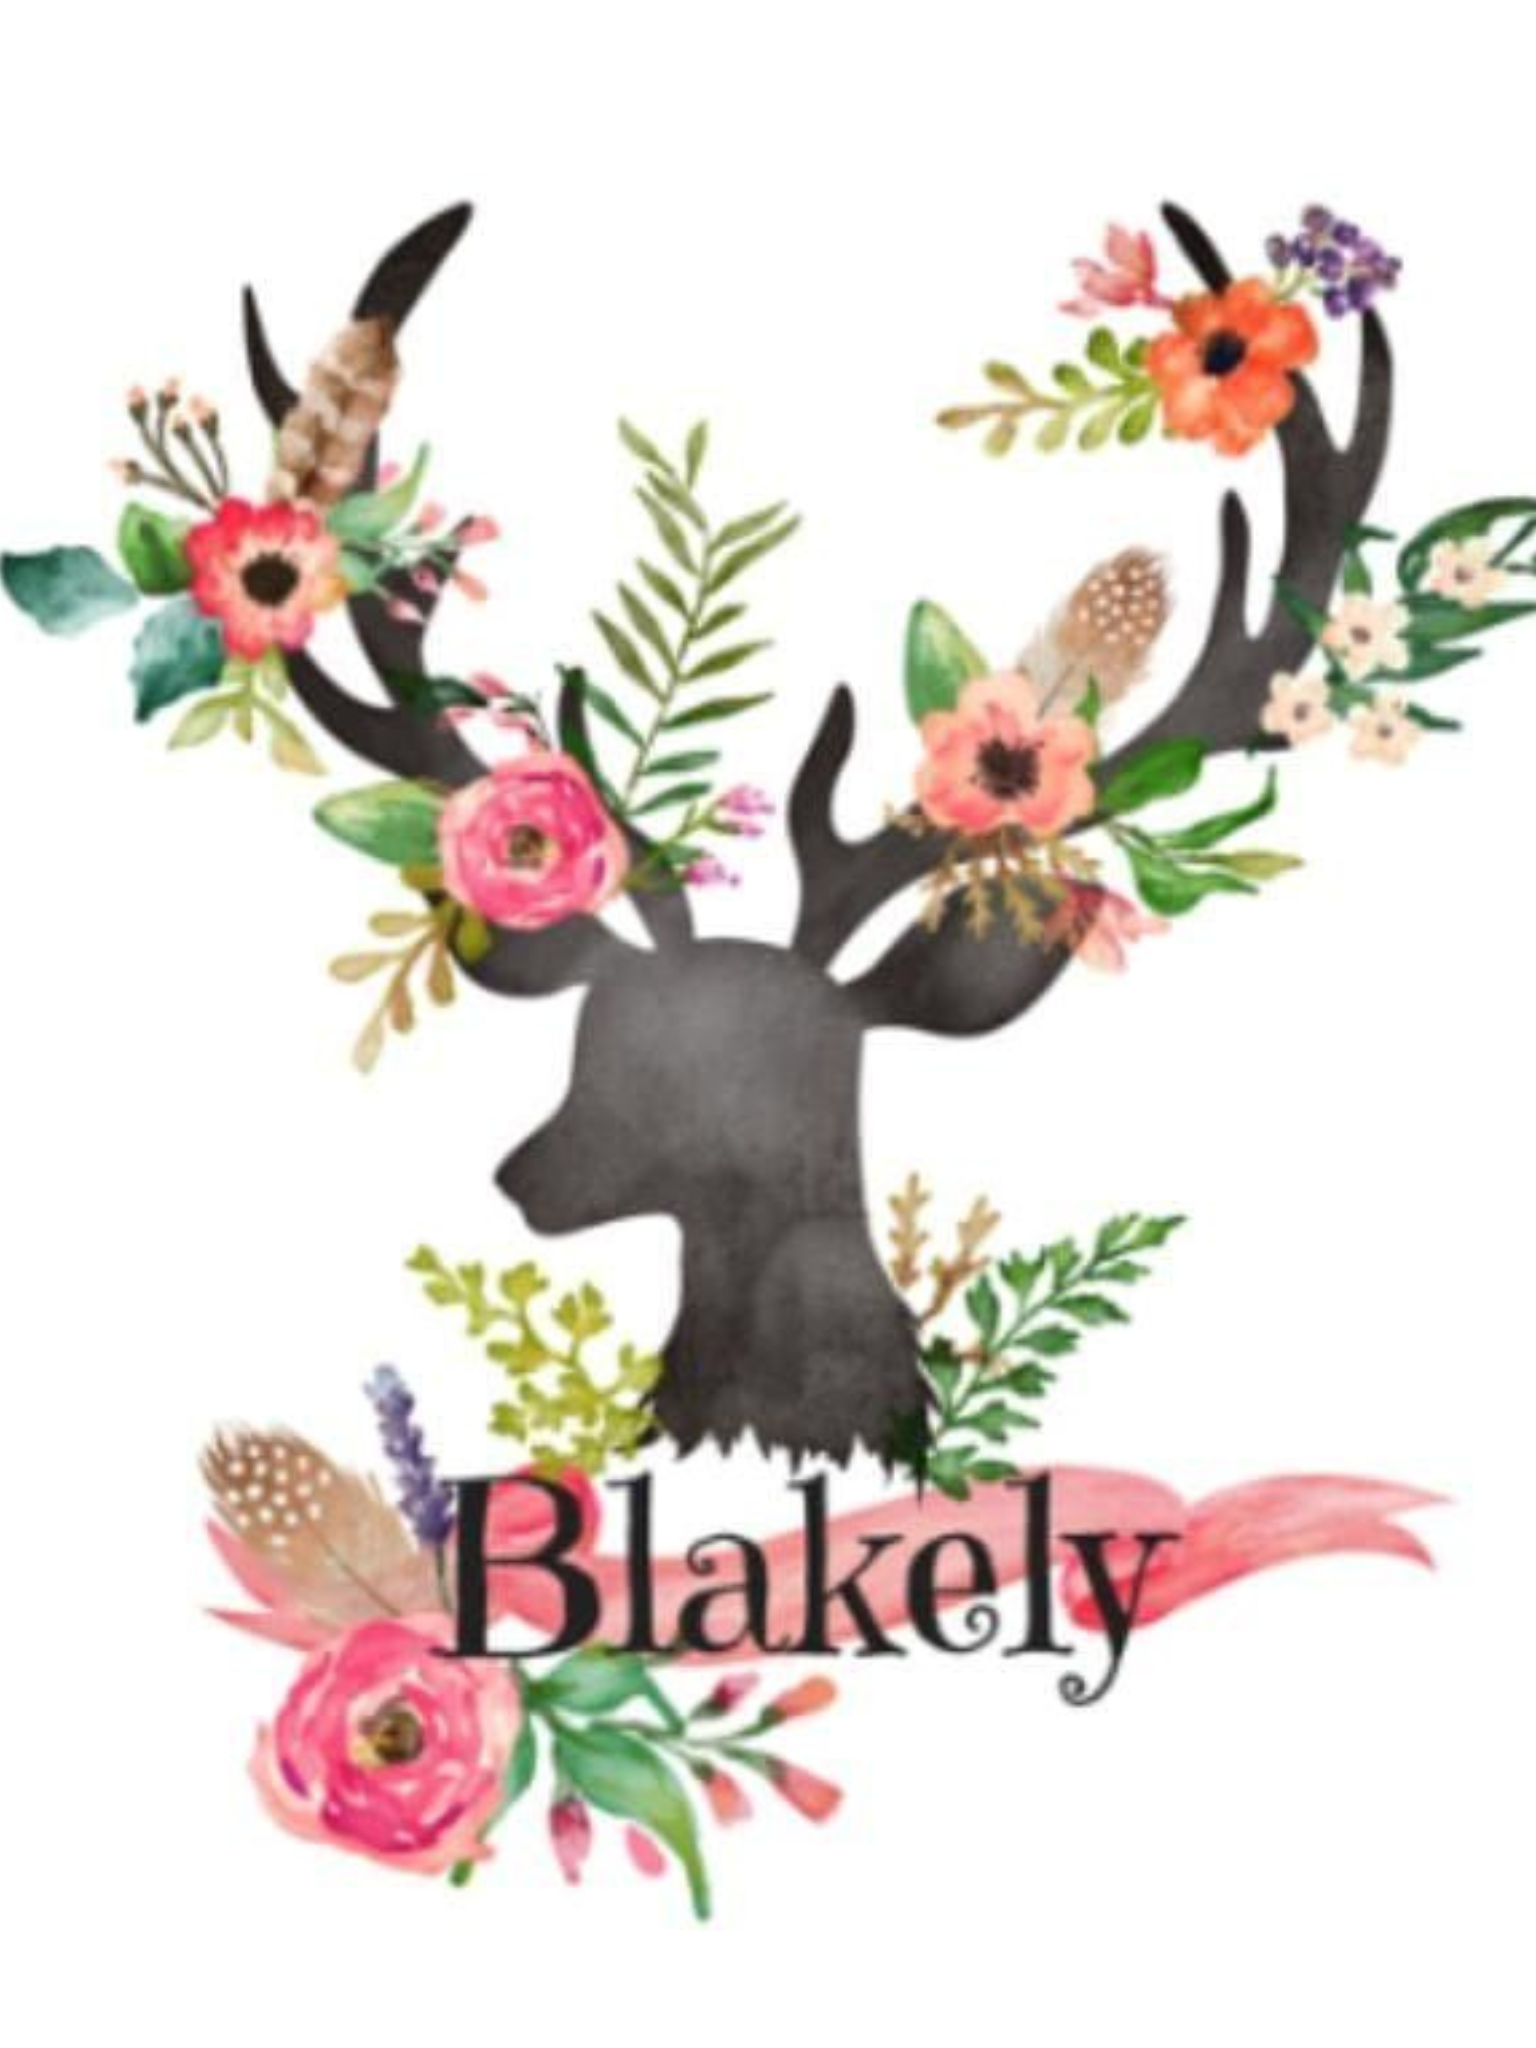 Standard blanket - Personalized Floral Deer Antlers and Fawn Minky Woodland Blanket - DBC Baby Bedding Co 